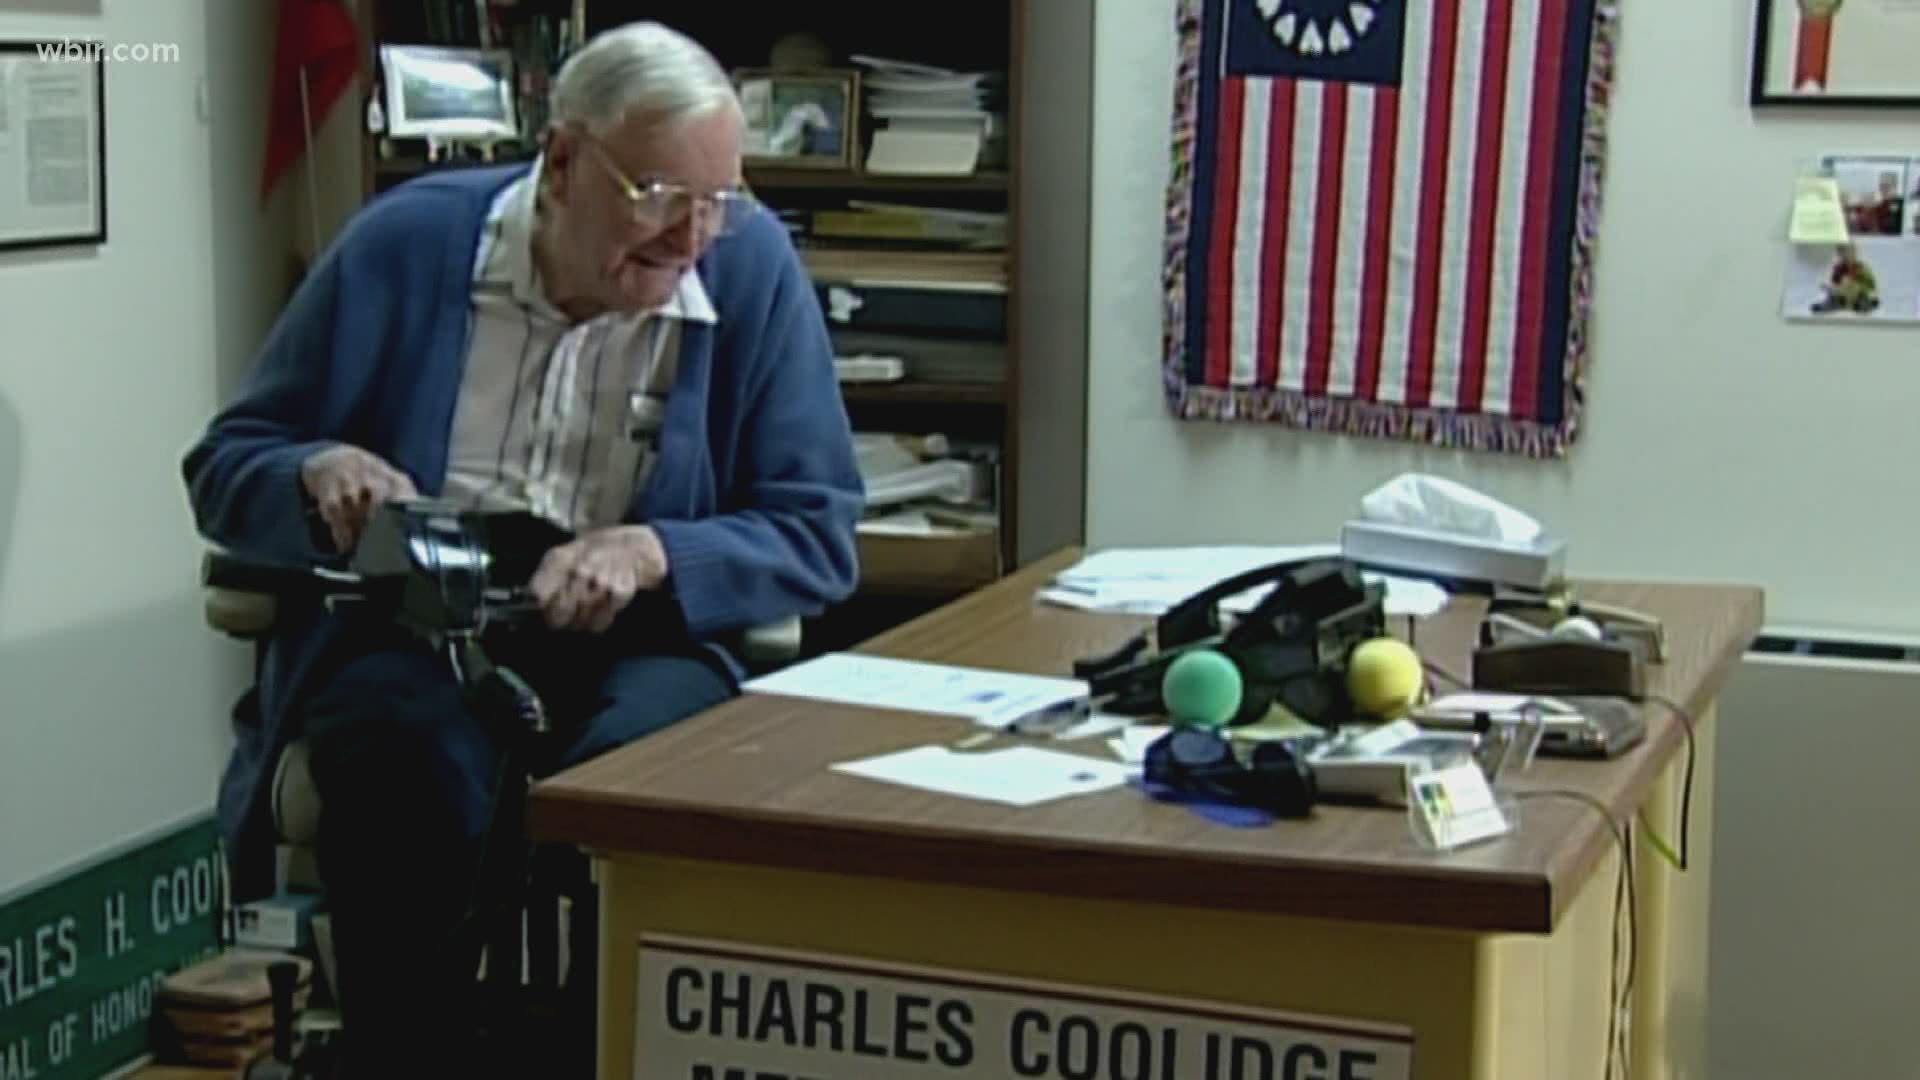 Charles Coolidge, one of two surviving Medal of Honor recipients from World War II, died at 99 years old.